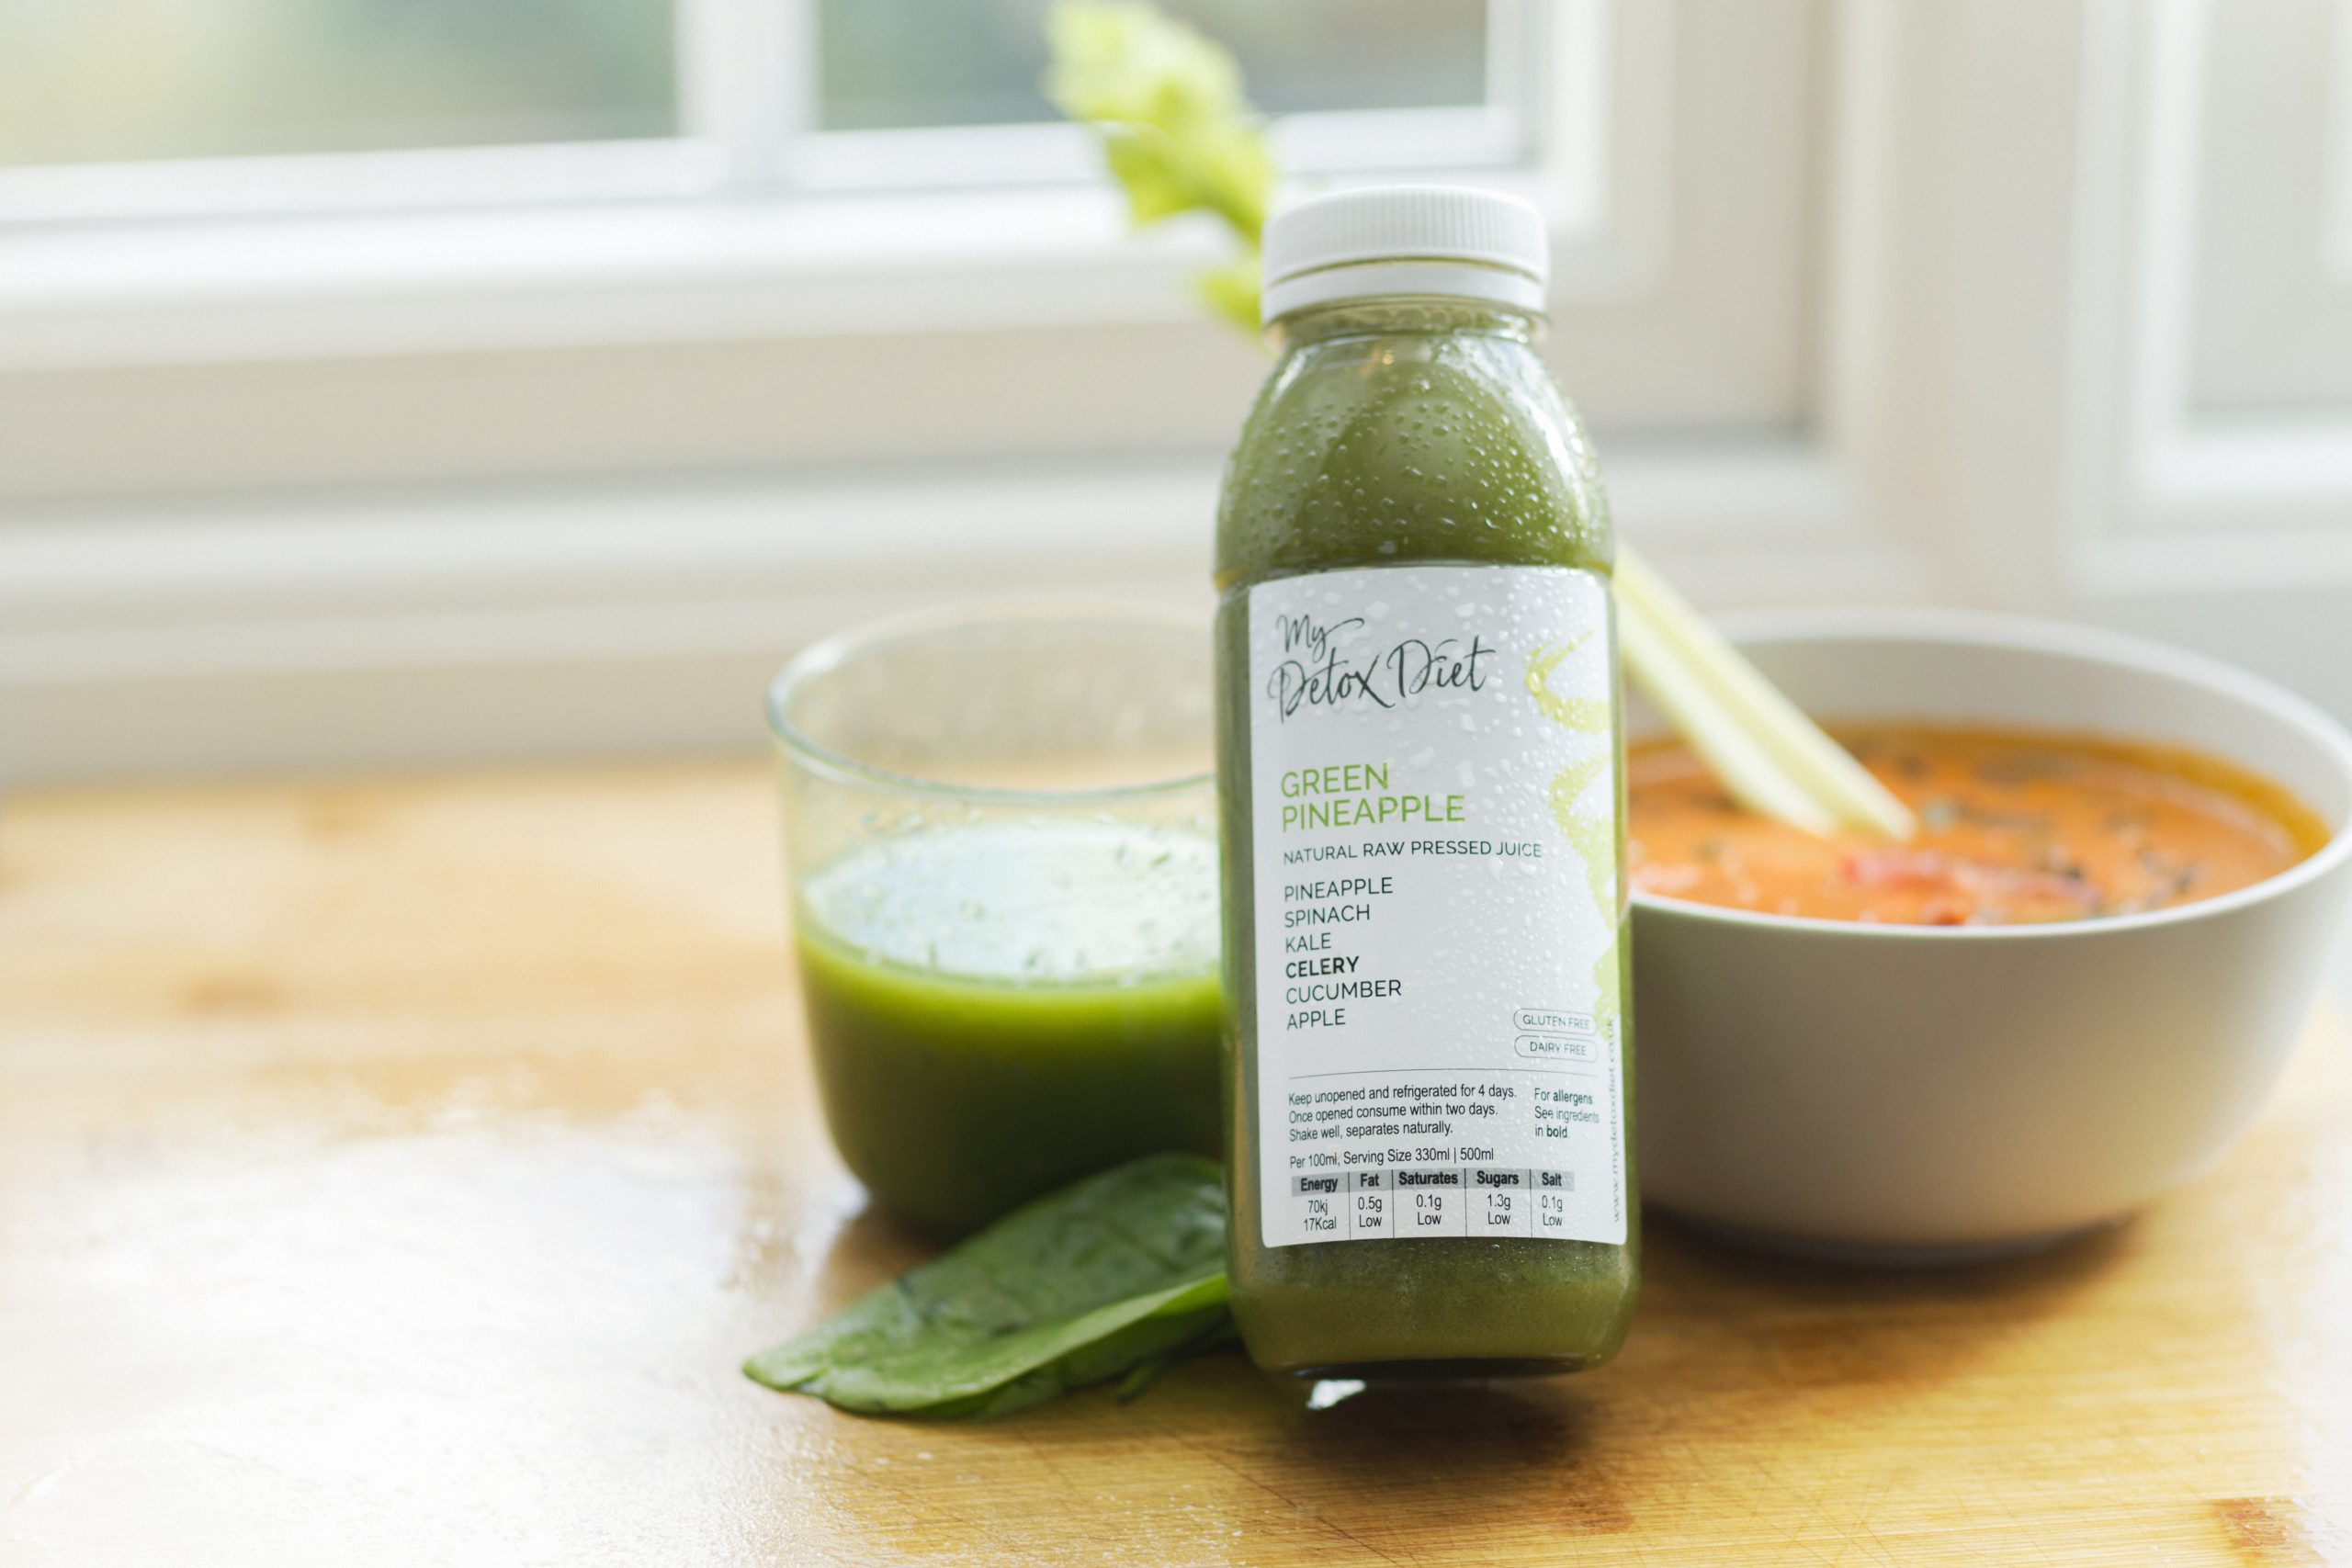 The Best Juice Cleanse in London